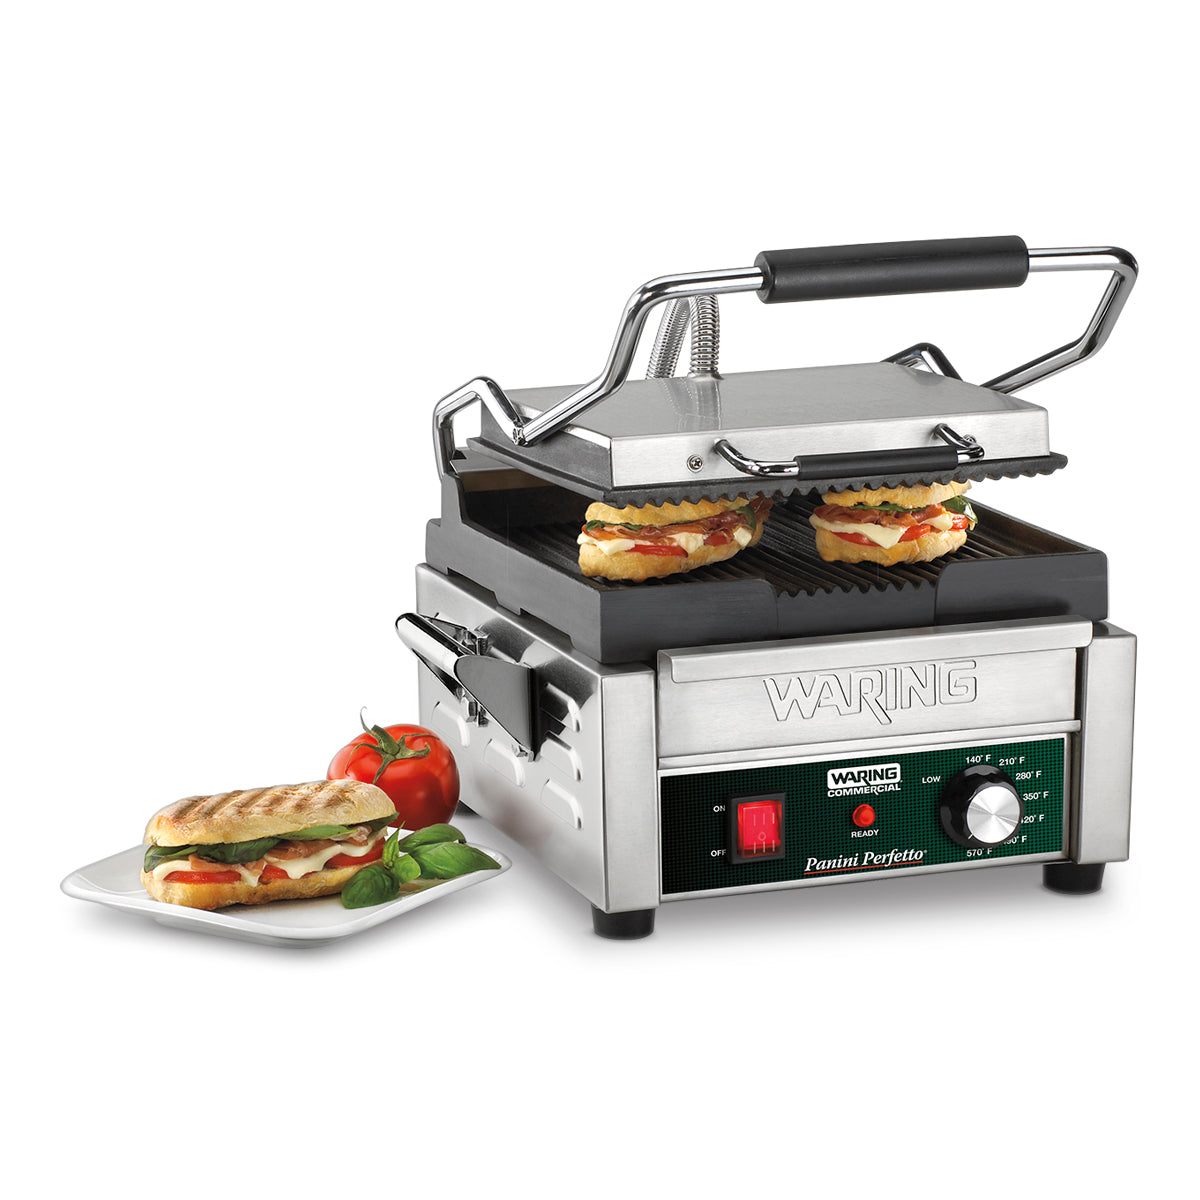 WPG150 Panini Perfetto - Compact Panini Grill by Waring Commercial